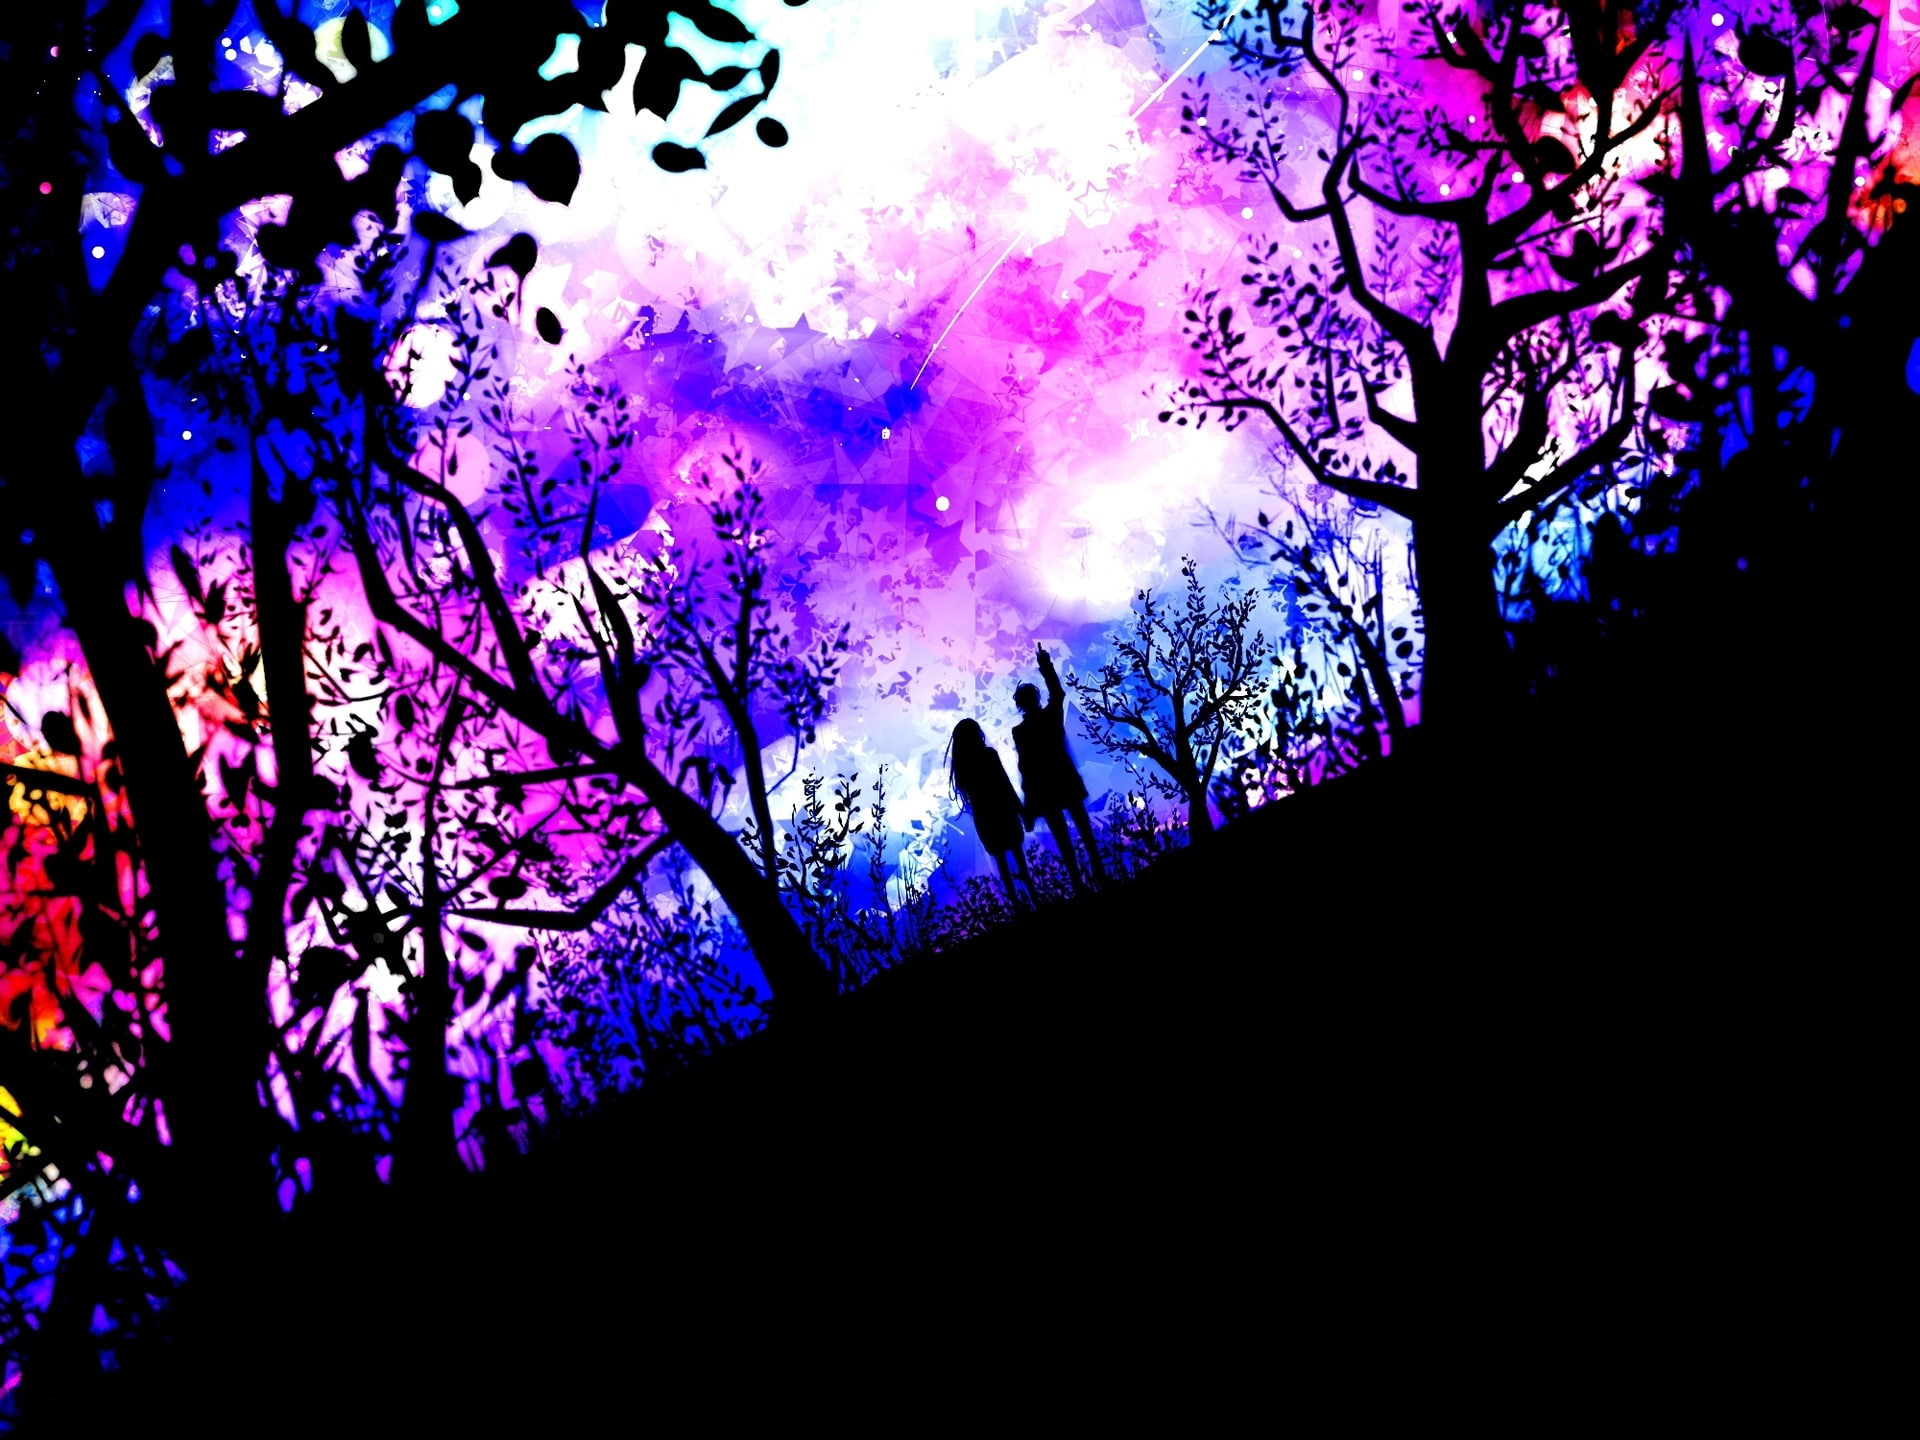 Art pictures, couple, nature, trees, stars, purple